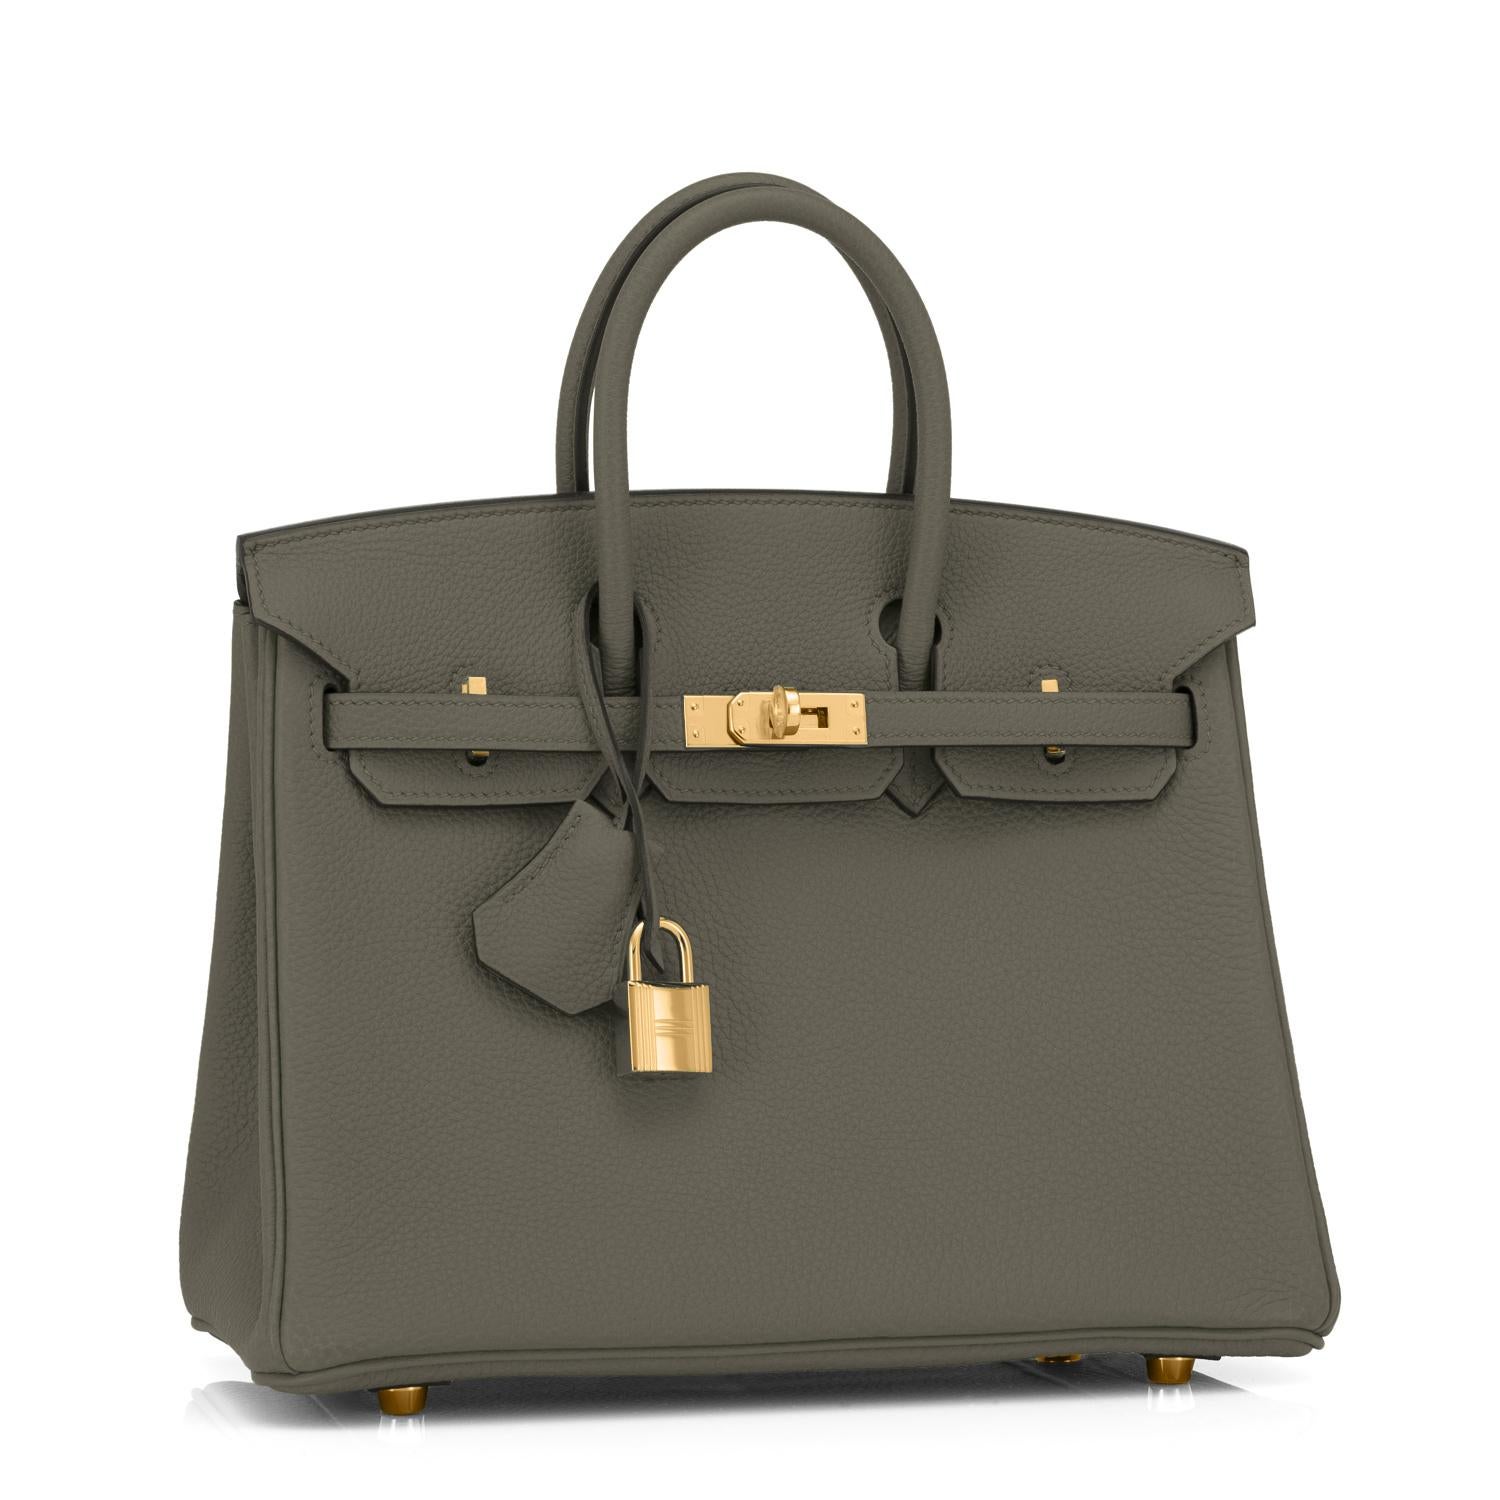 Hermes Vert Maquis Birkin 25cm Togo Gold Hardware Y Stamp, 2020
Uber chic and sleek Baby Birkin for the modern fashionista!
Brand New in Box. Store Fresh. Pristine Condition (with plastic on hardware)
Just purchased from Hermes store; bag bears new